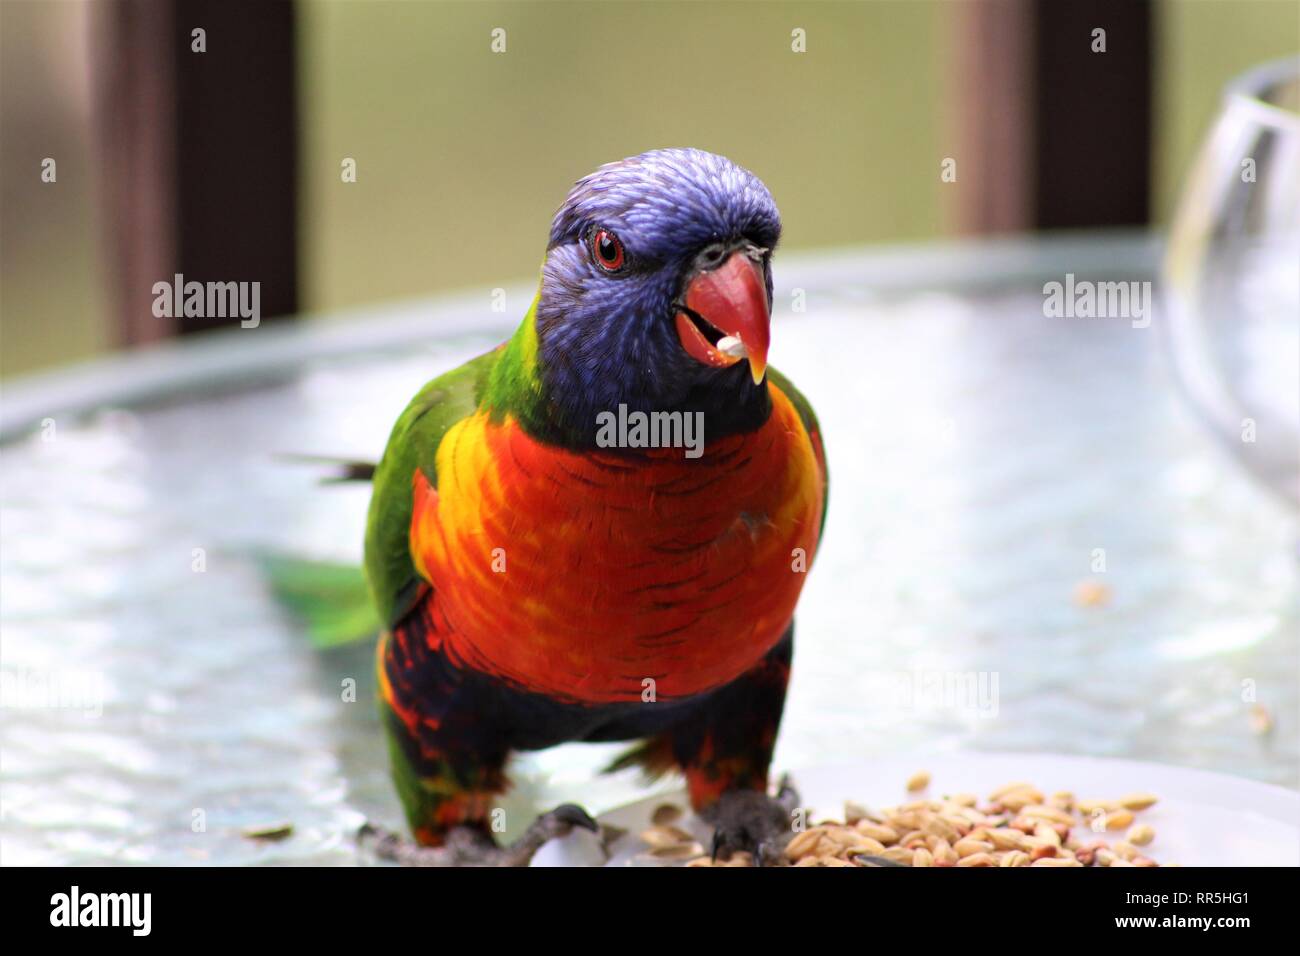 Cute exotic colorful lorikeet eating seeds, sitting on a table Stock Photo